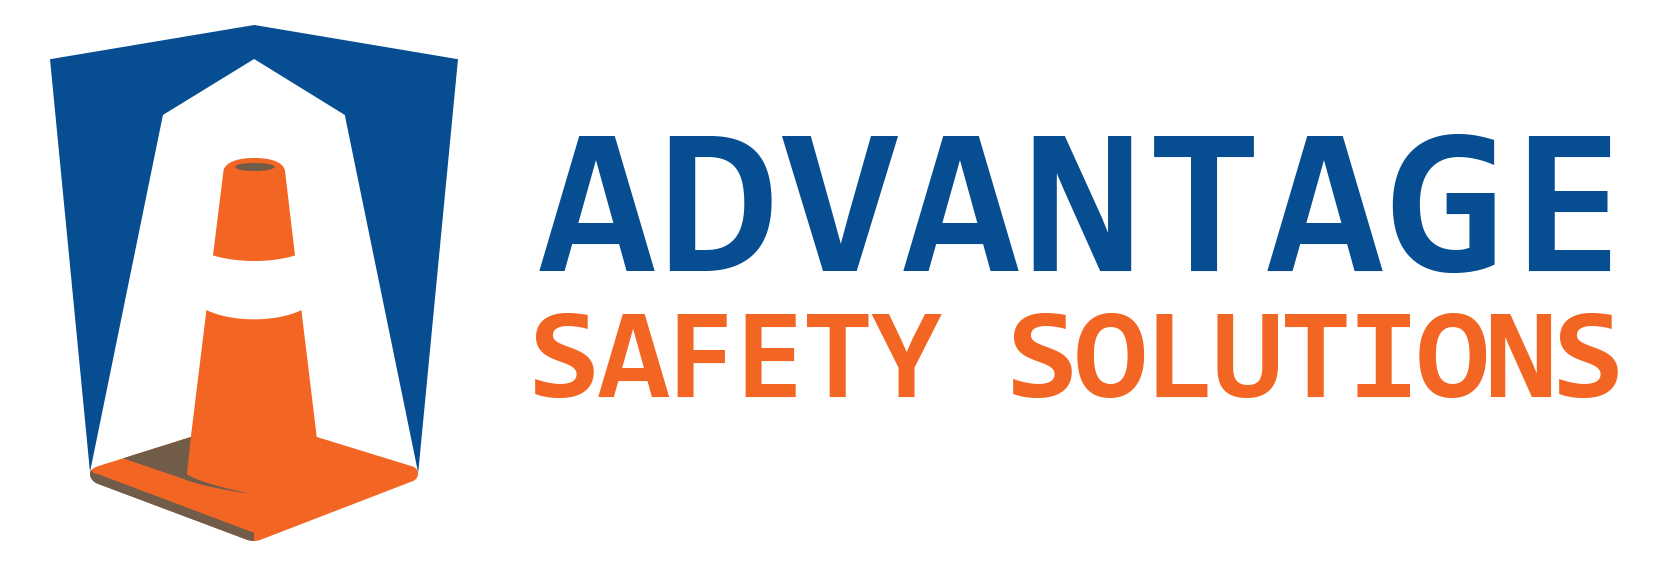 Advantage Safety Solutions